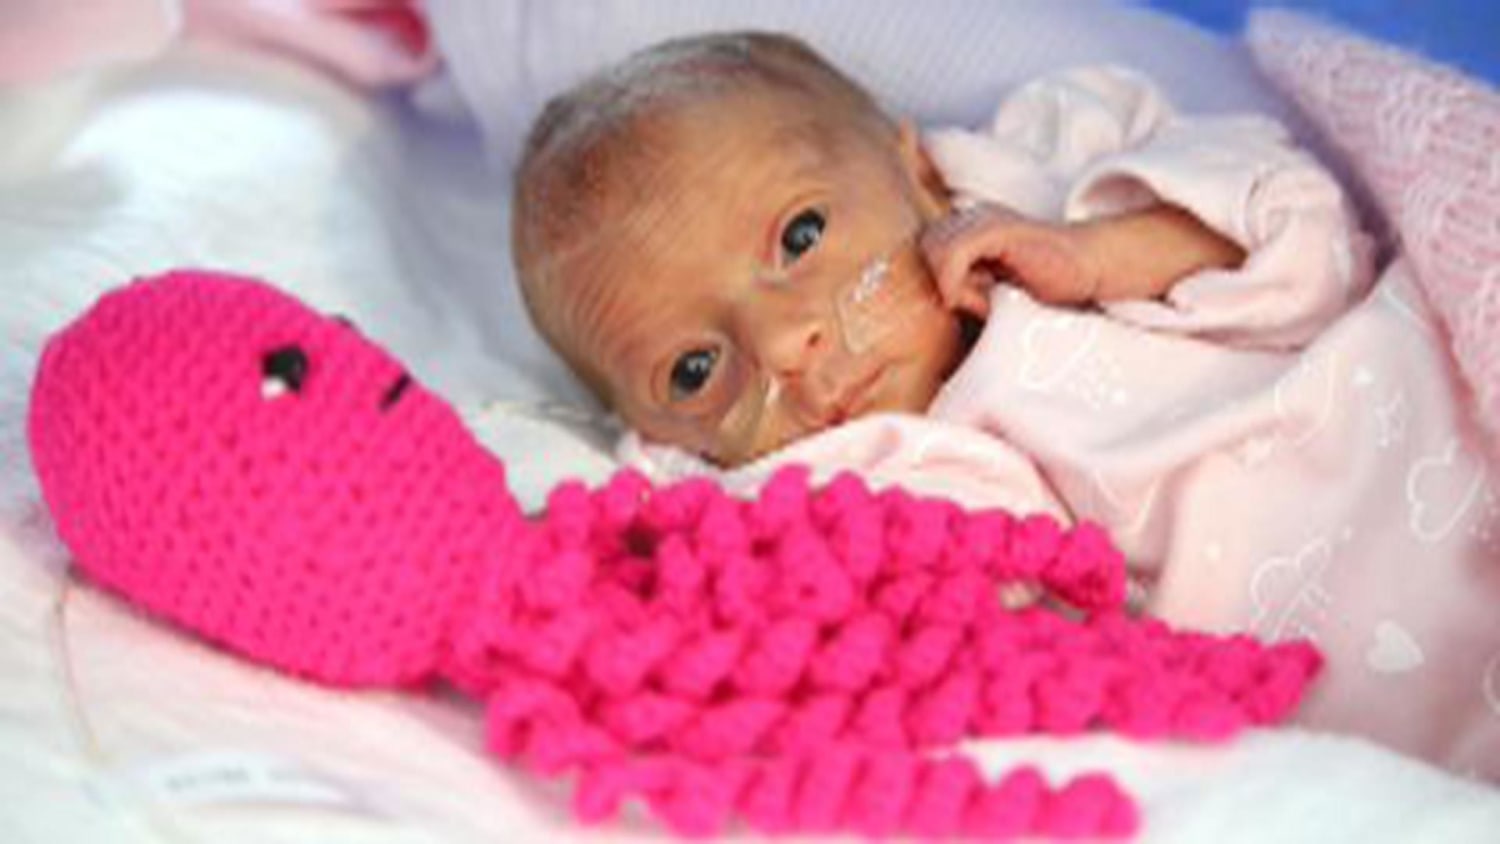 The most premature surviving baby was born at 21 weeks